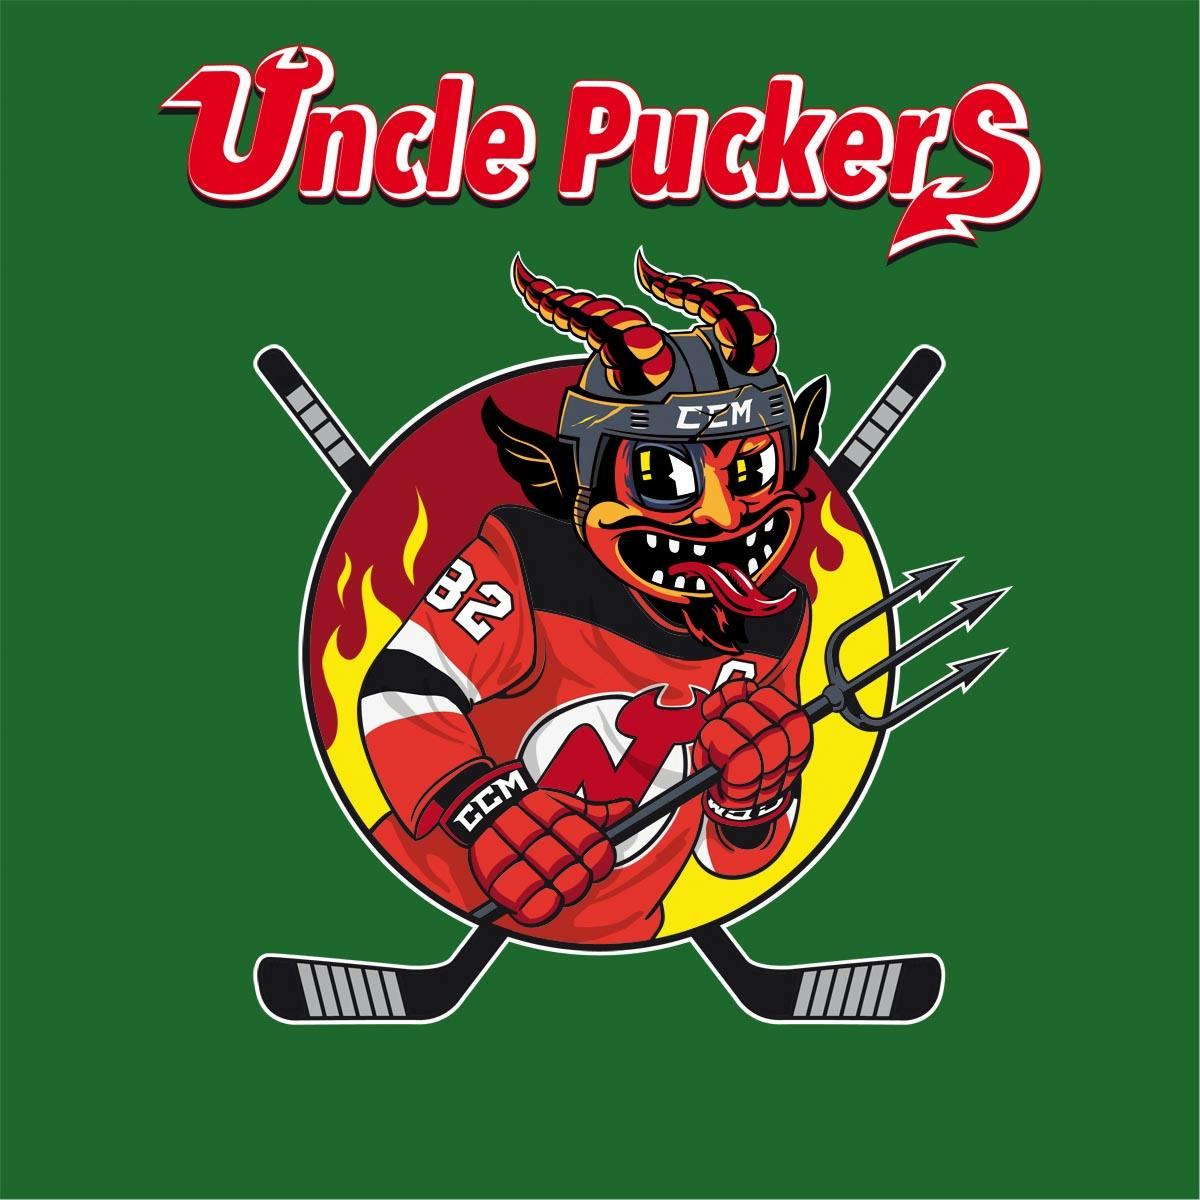 Most Disappointing Devils Team Ever?